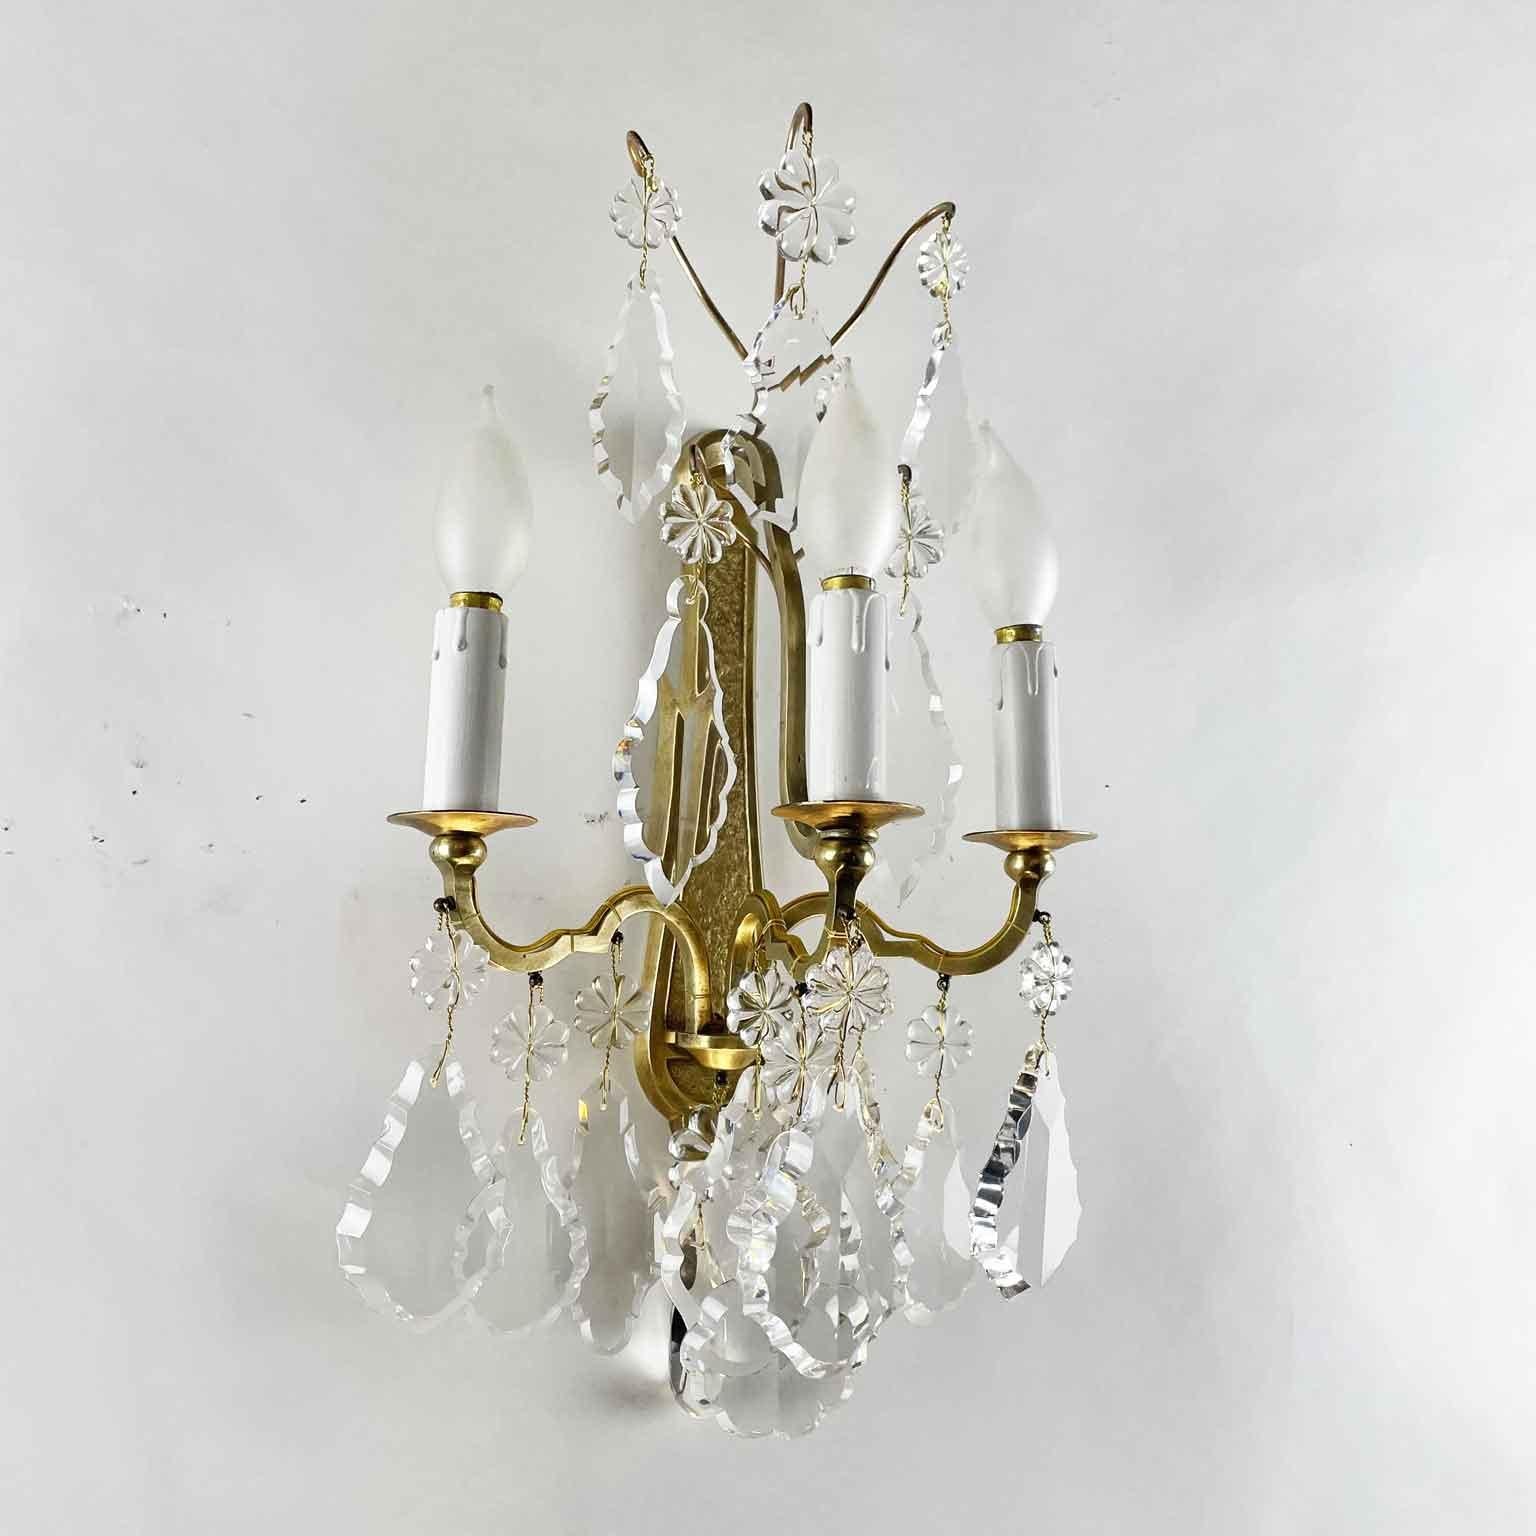 Set of Four Baccarat Crystal Sconces 20th Century French Gilt Wall Lights 6